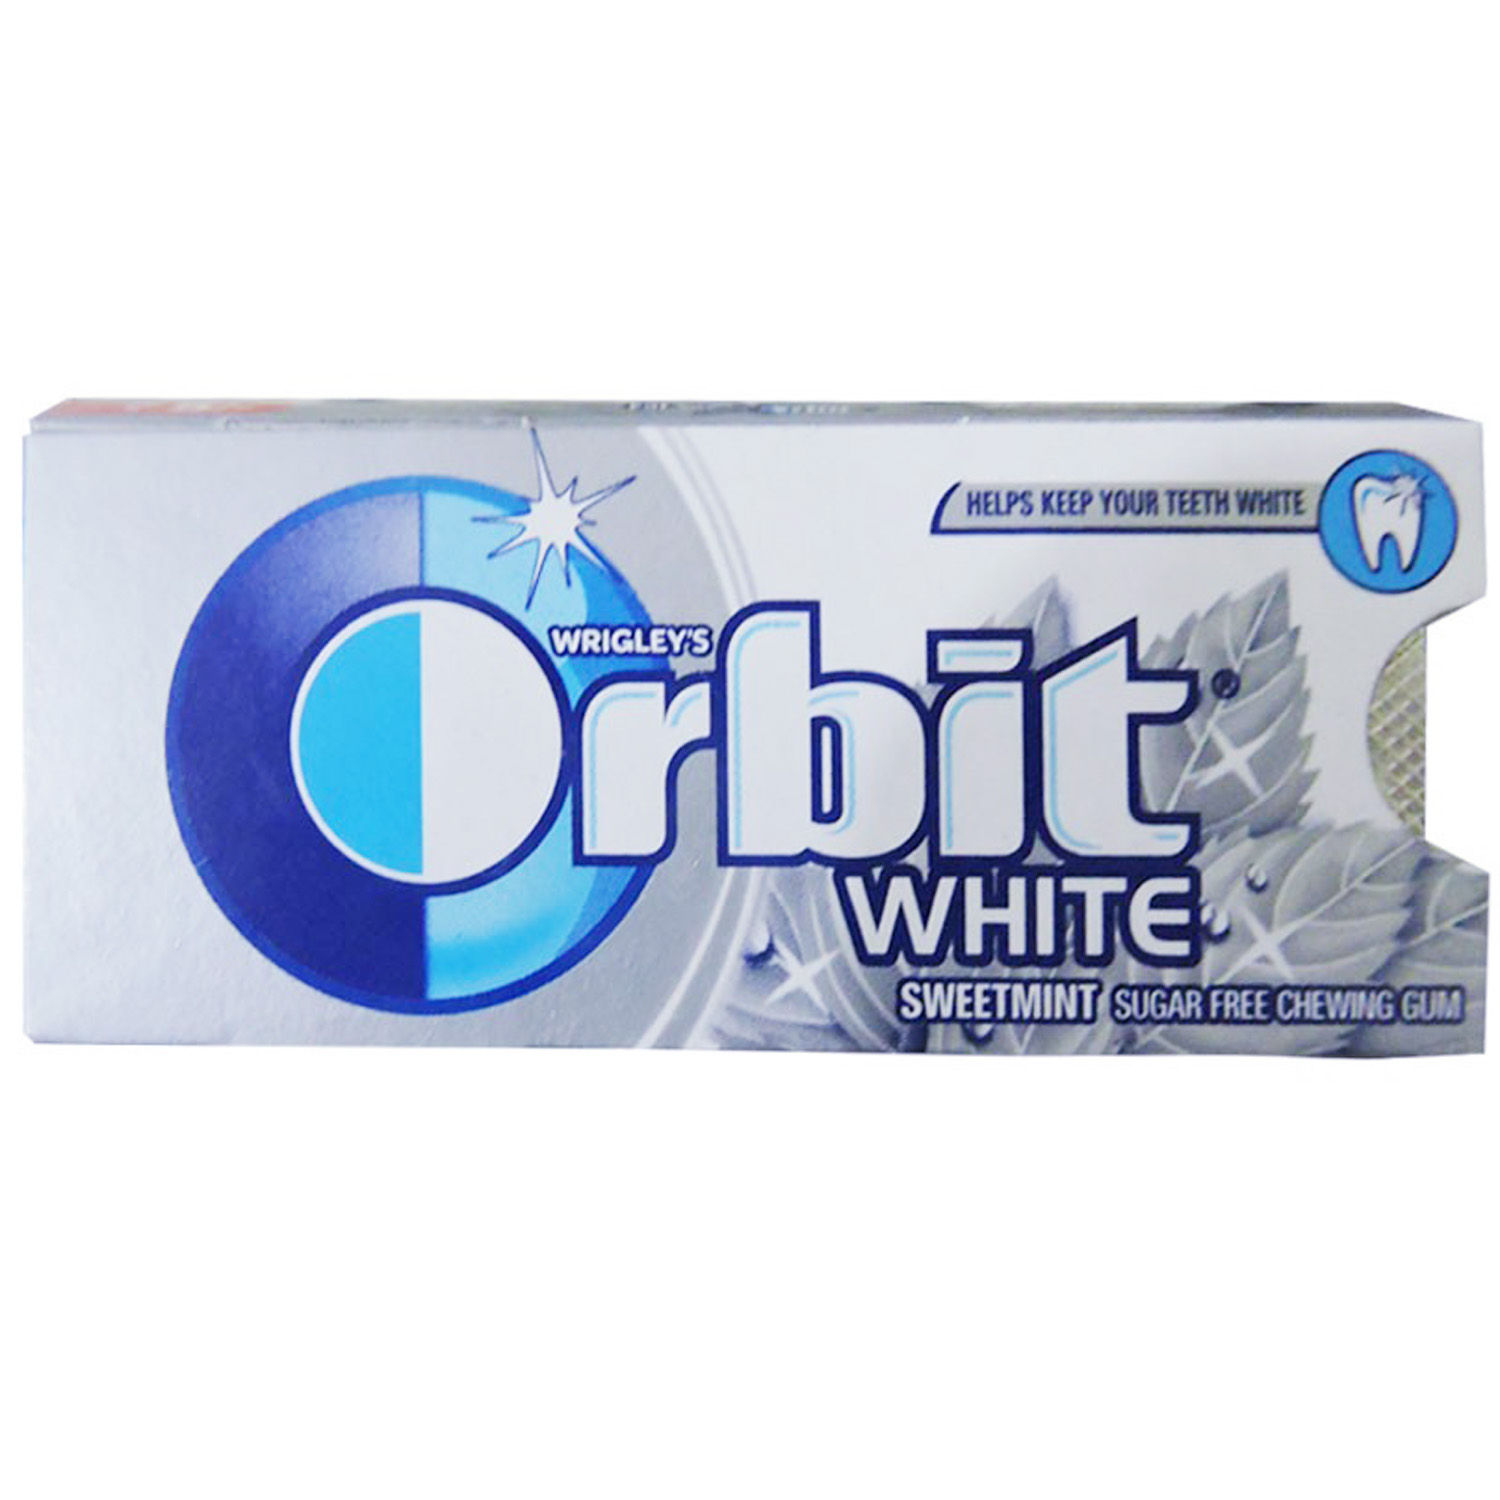 Wrigley's Orbit White Sweet Mint Sugar Free Chewing Gum, 9 Count, Pack of 1 